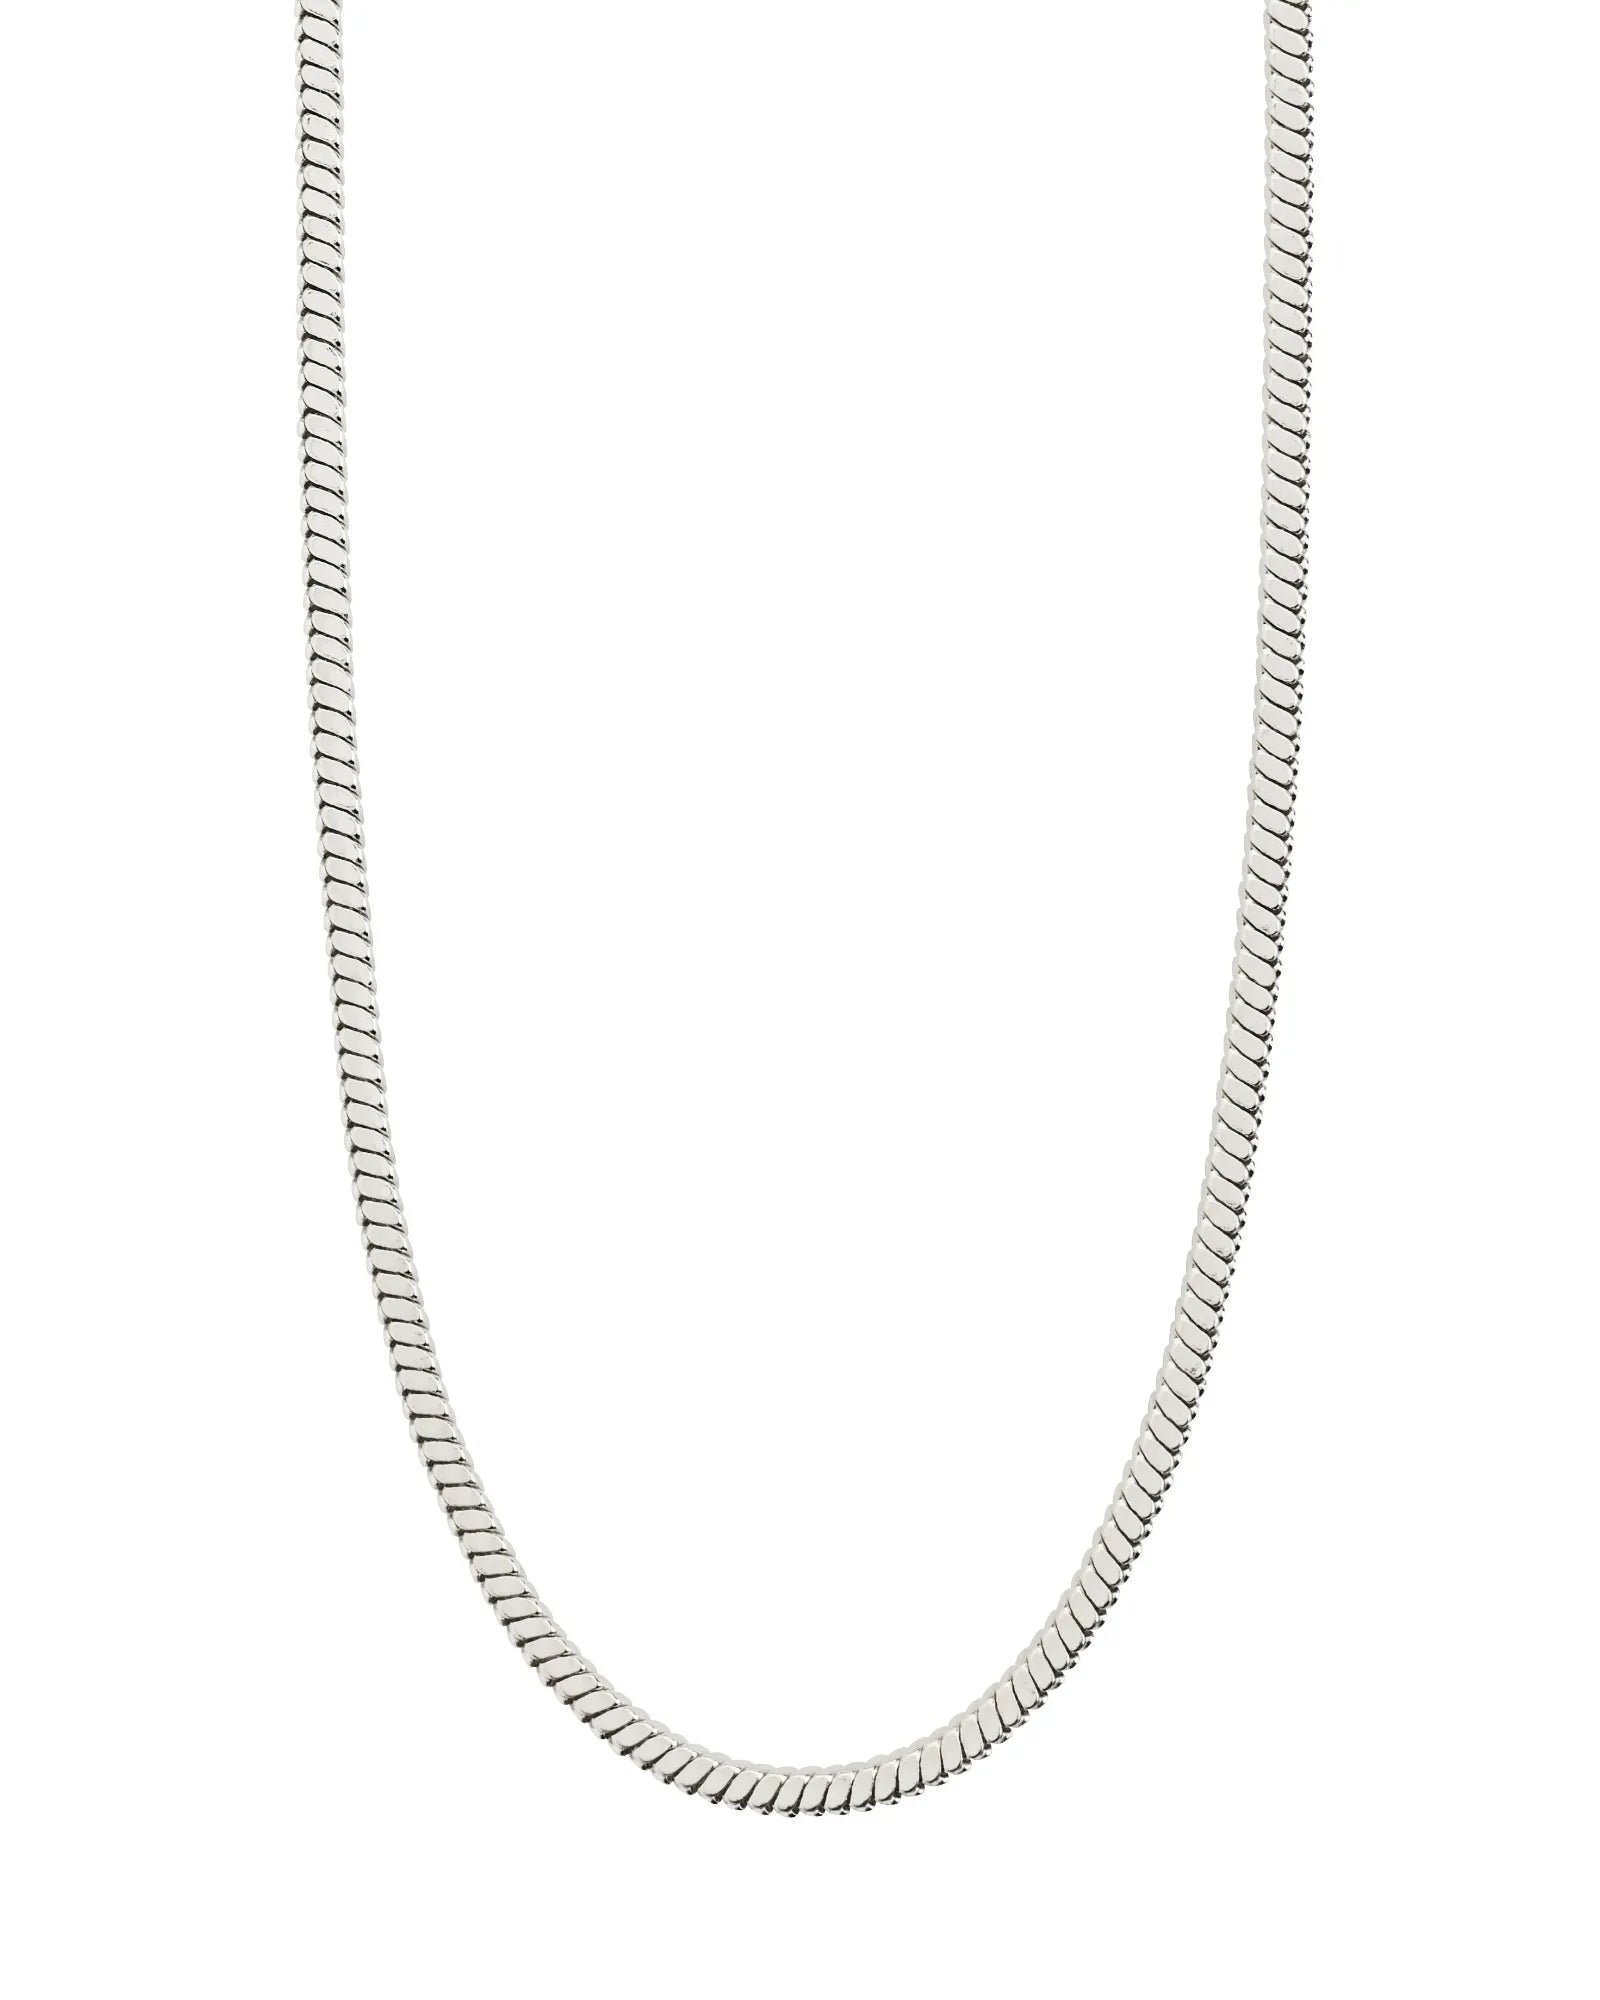 DOMINIQUE Recycled Necklace - Silver Plated